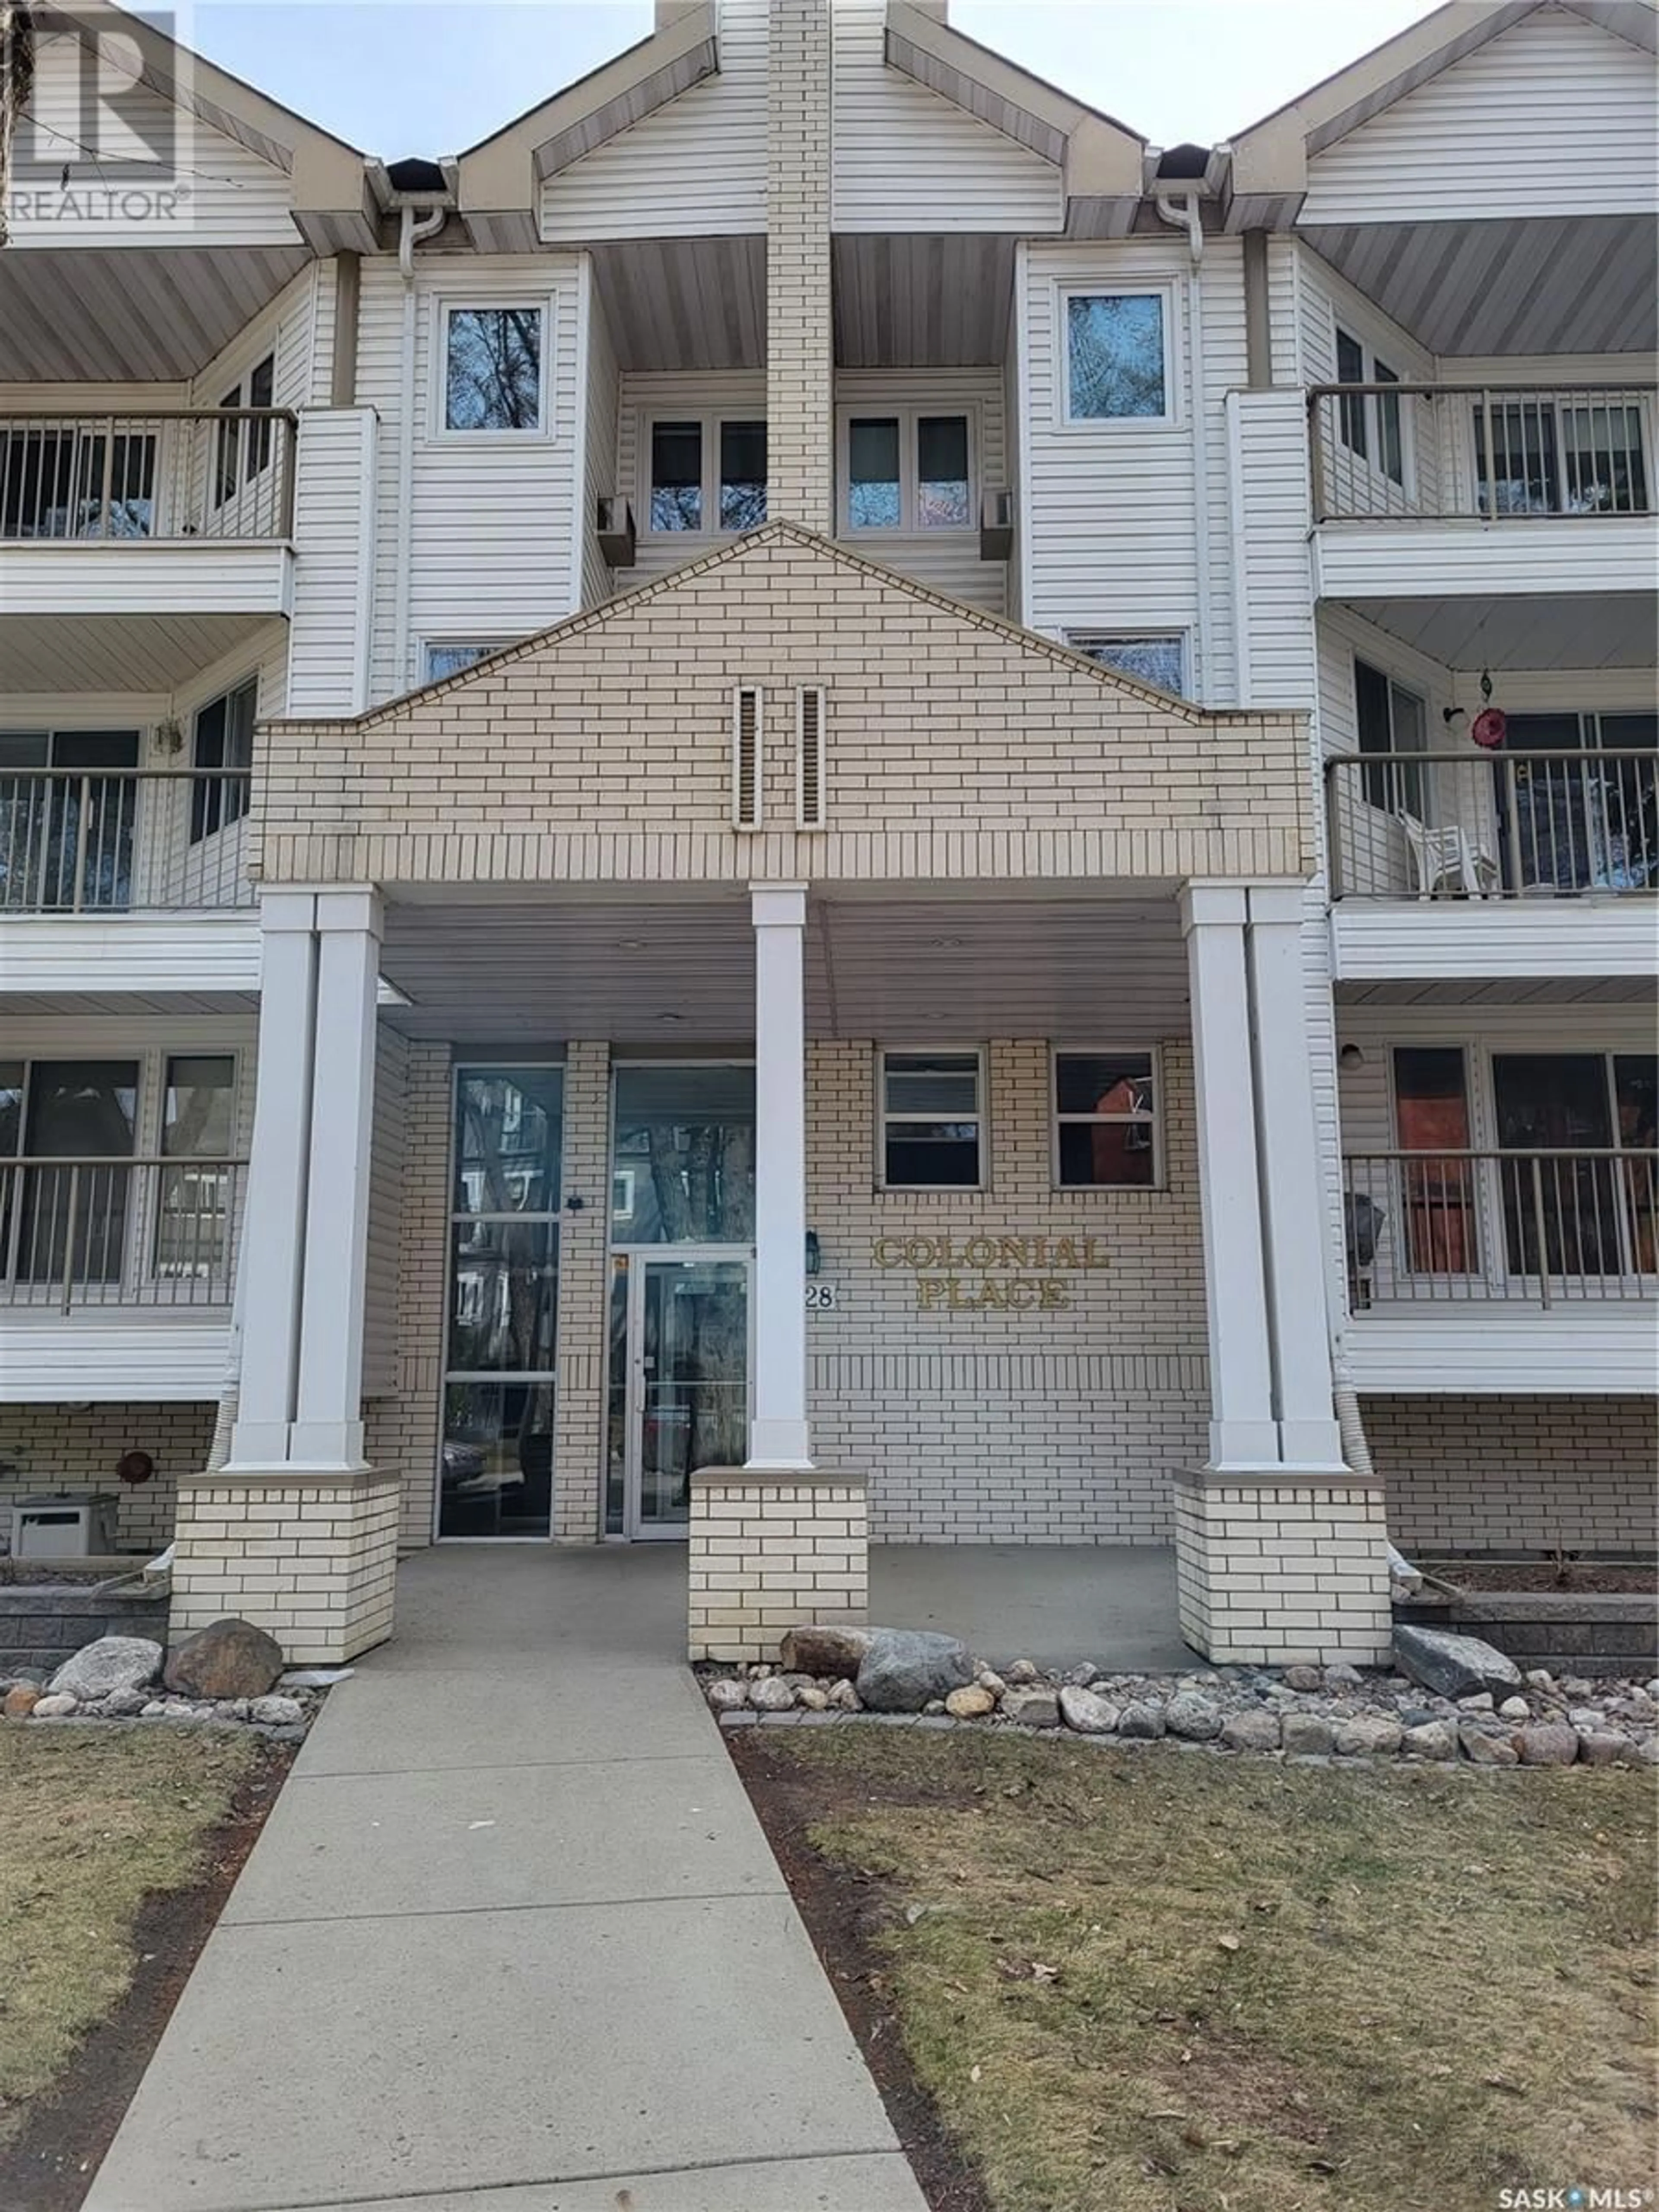 A pic from exterior of the house or condo for 204 428 4th AVENUE N, Saskatoon Saskatchewan S7K2M3